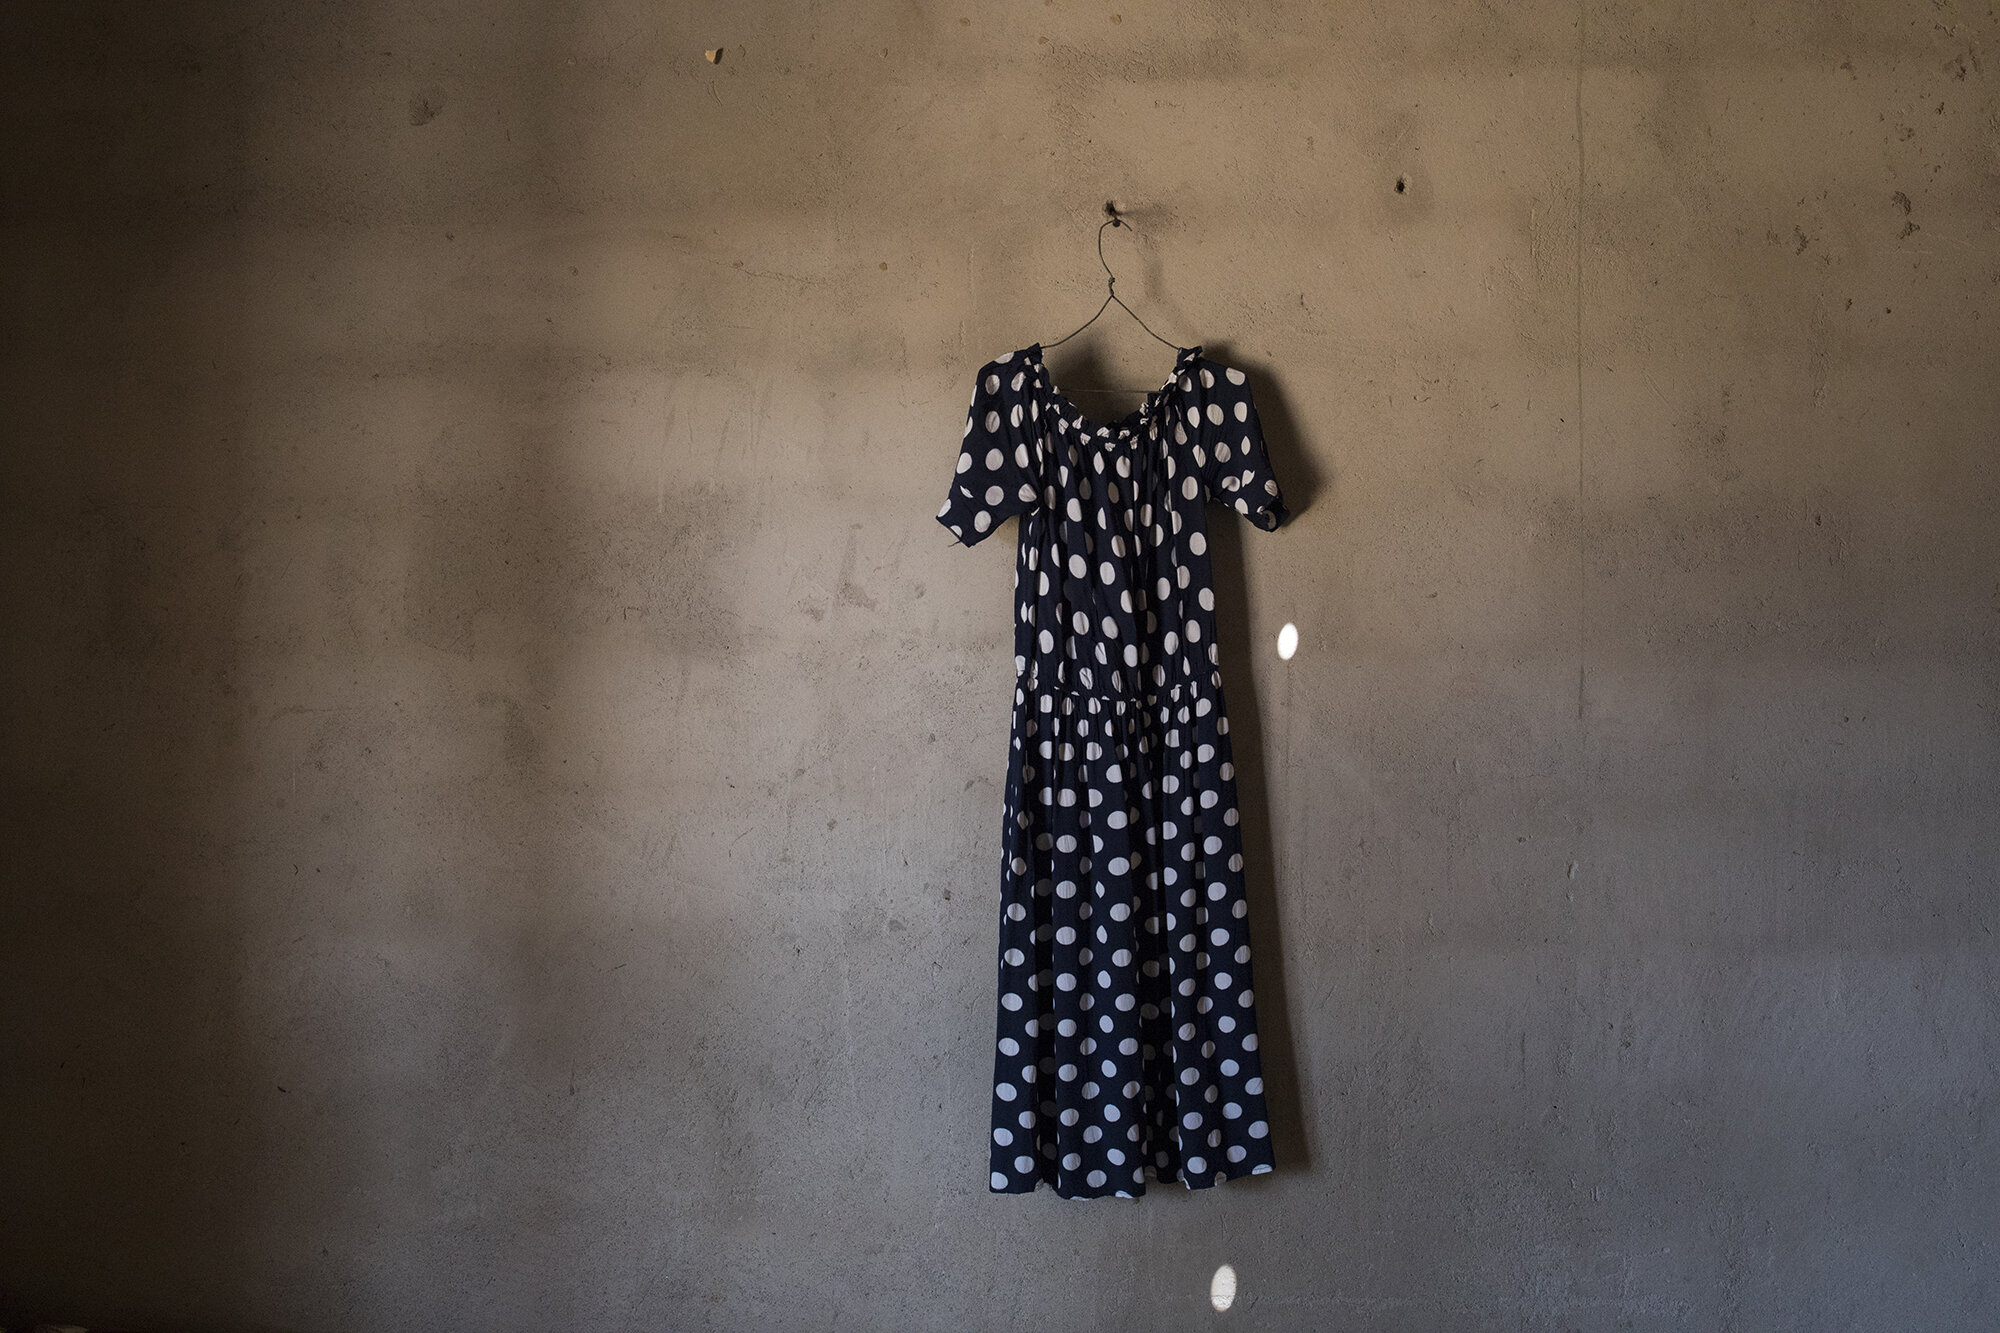  “After working in South Africa I only managed to buy myself a dress before I lost my job and had to return home. That is the dress I came back with. It reminds me the importance of getting an education. If you get an education, you can get a good jo